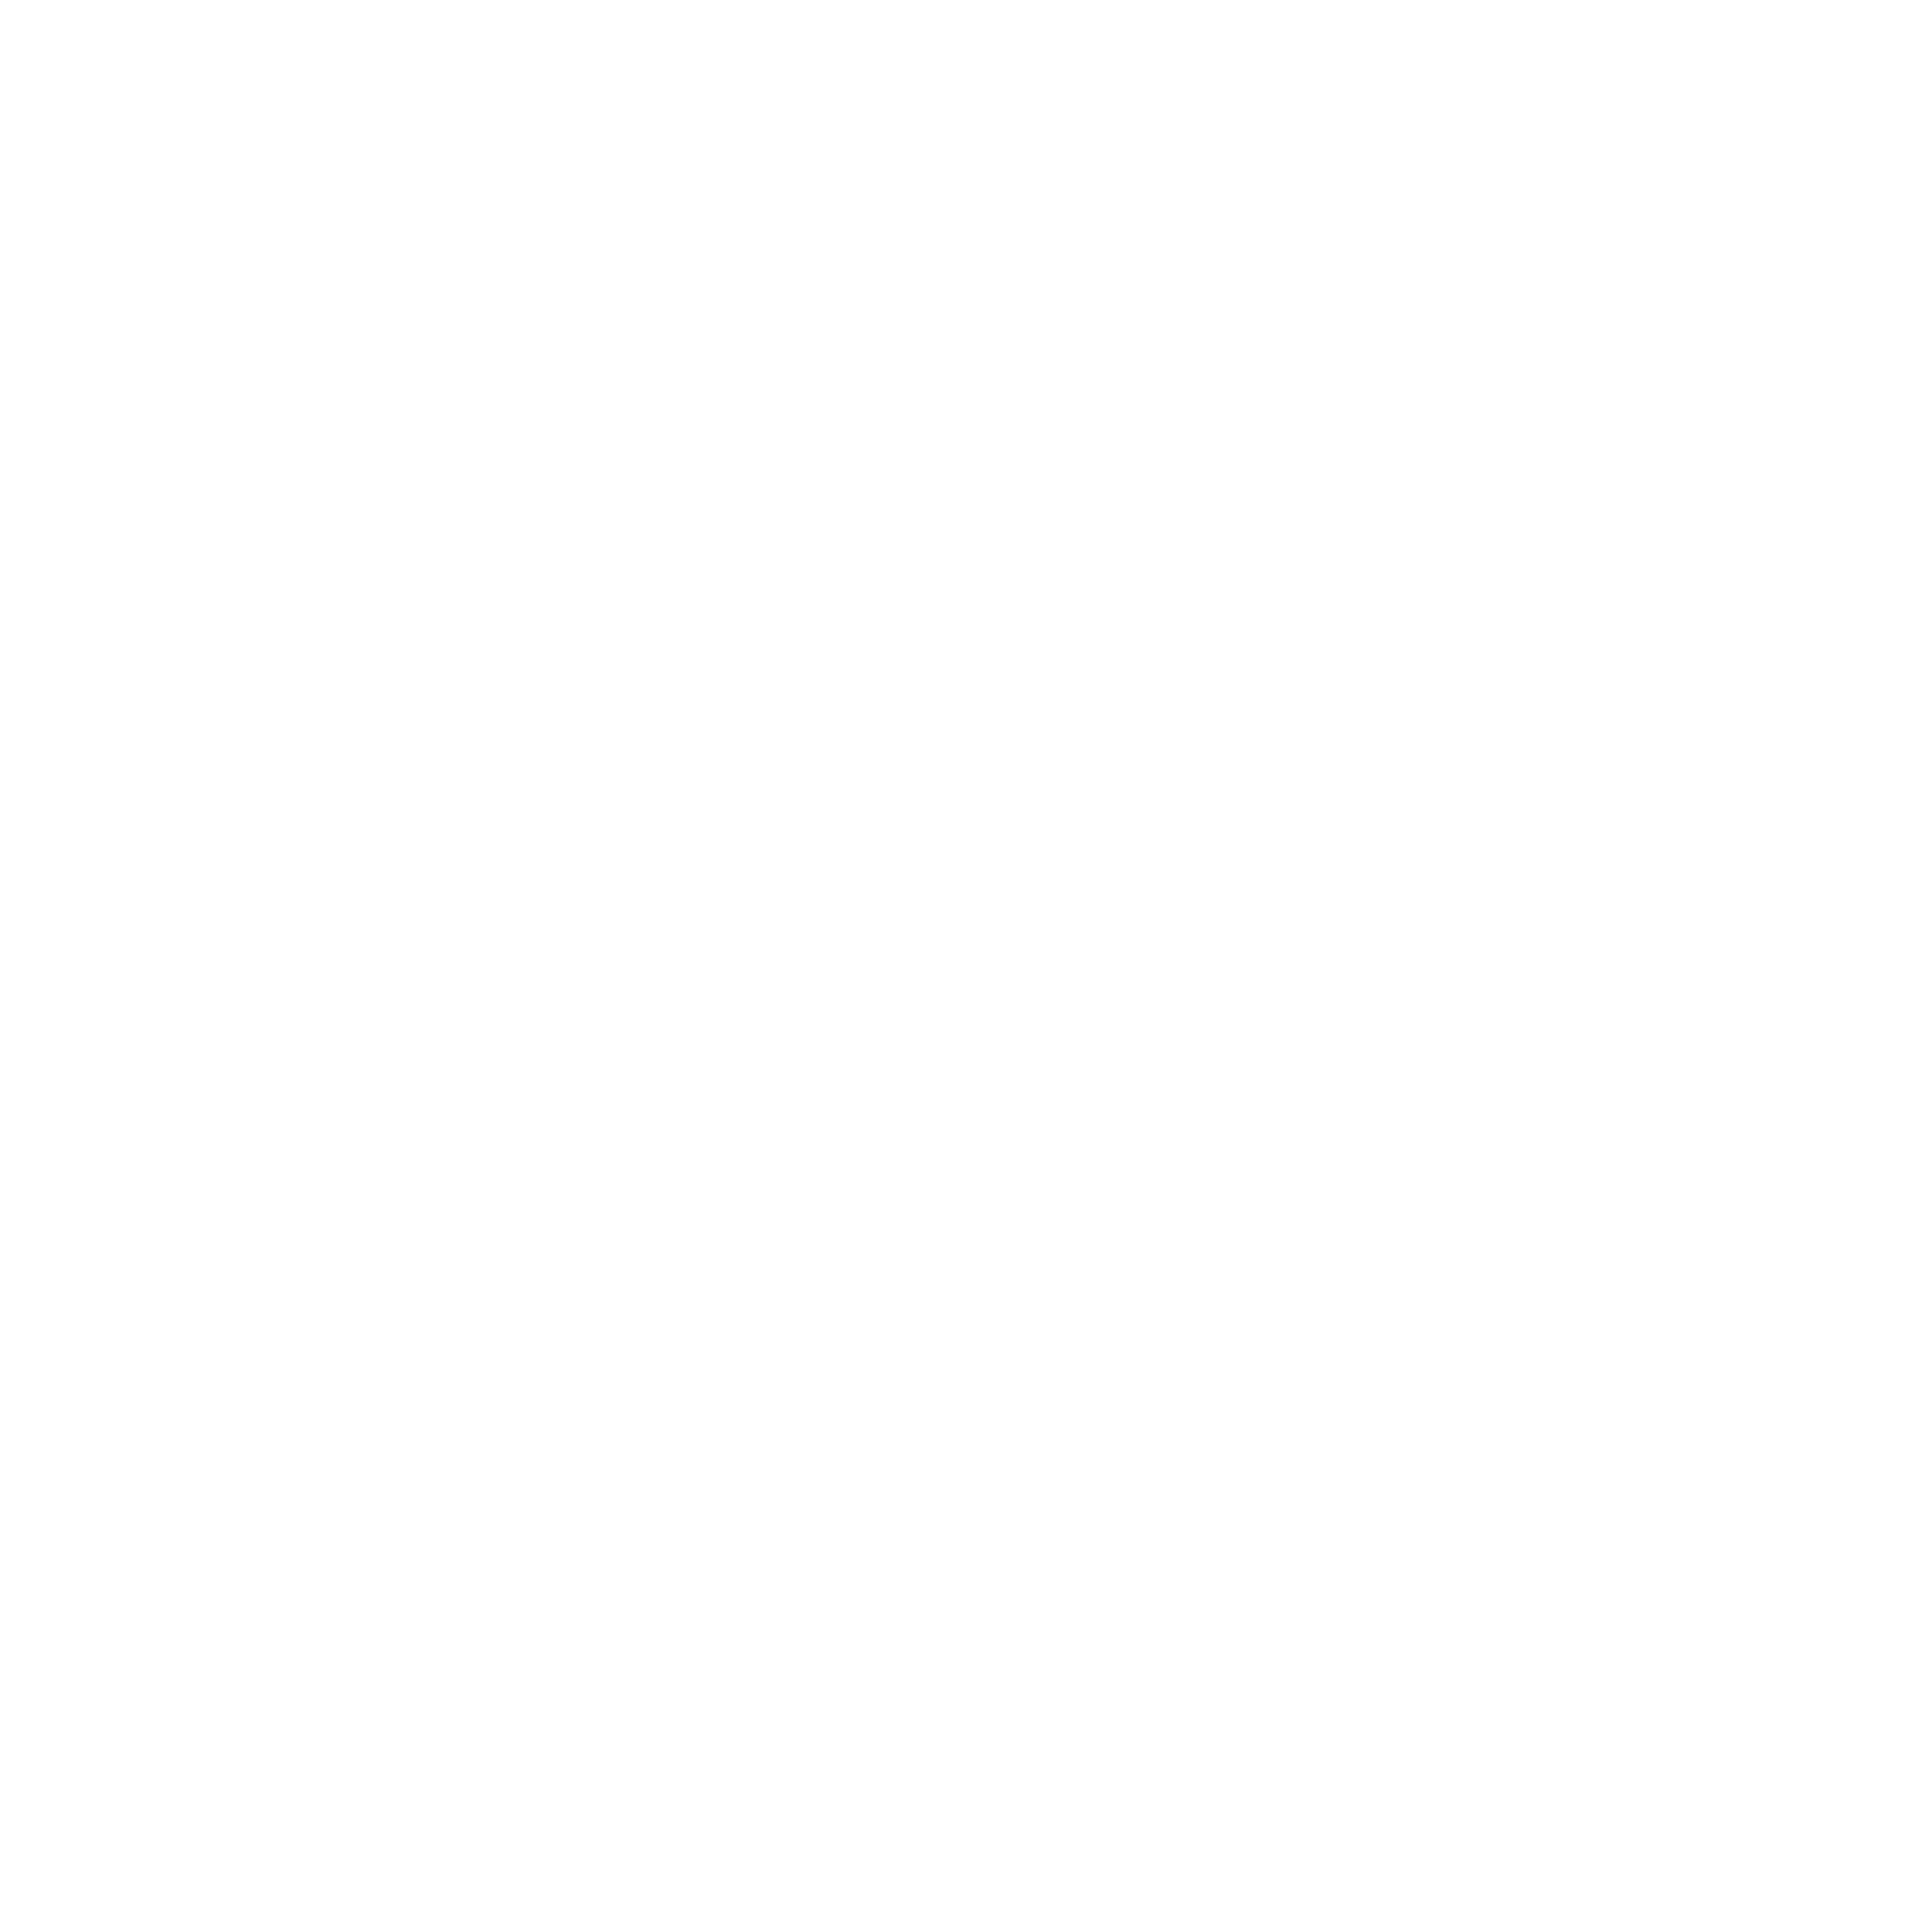 location_white-01-01.png